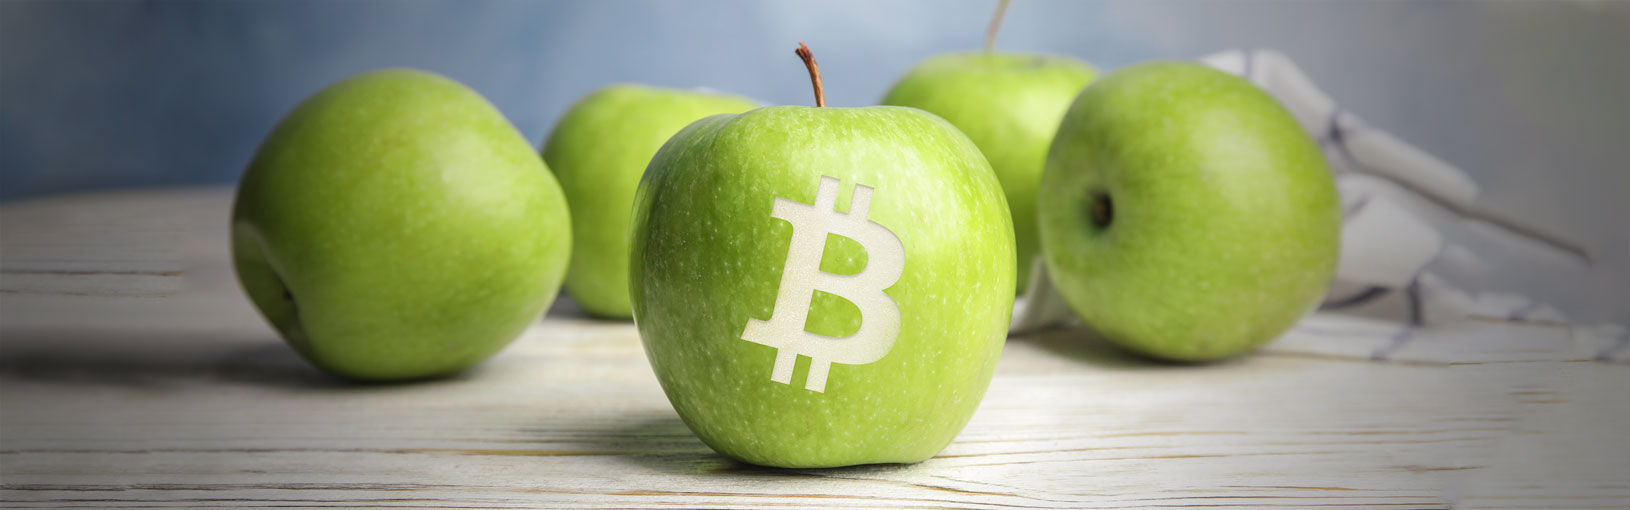 applecoin cryptocurrency